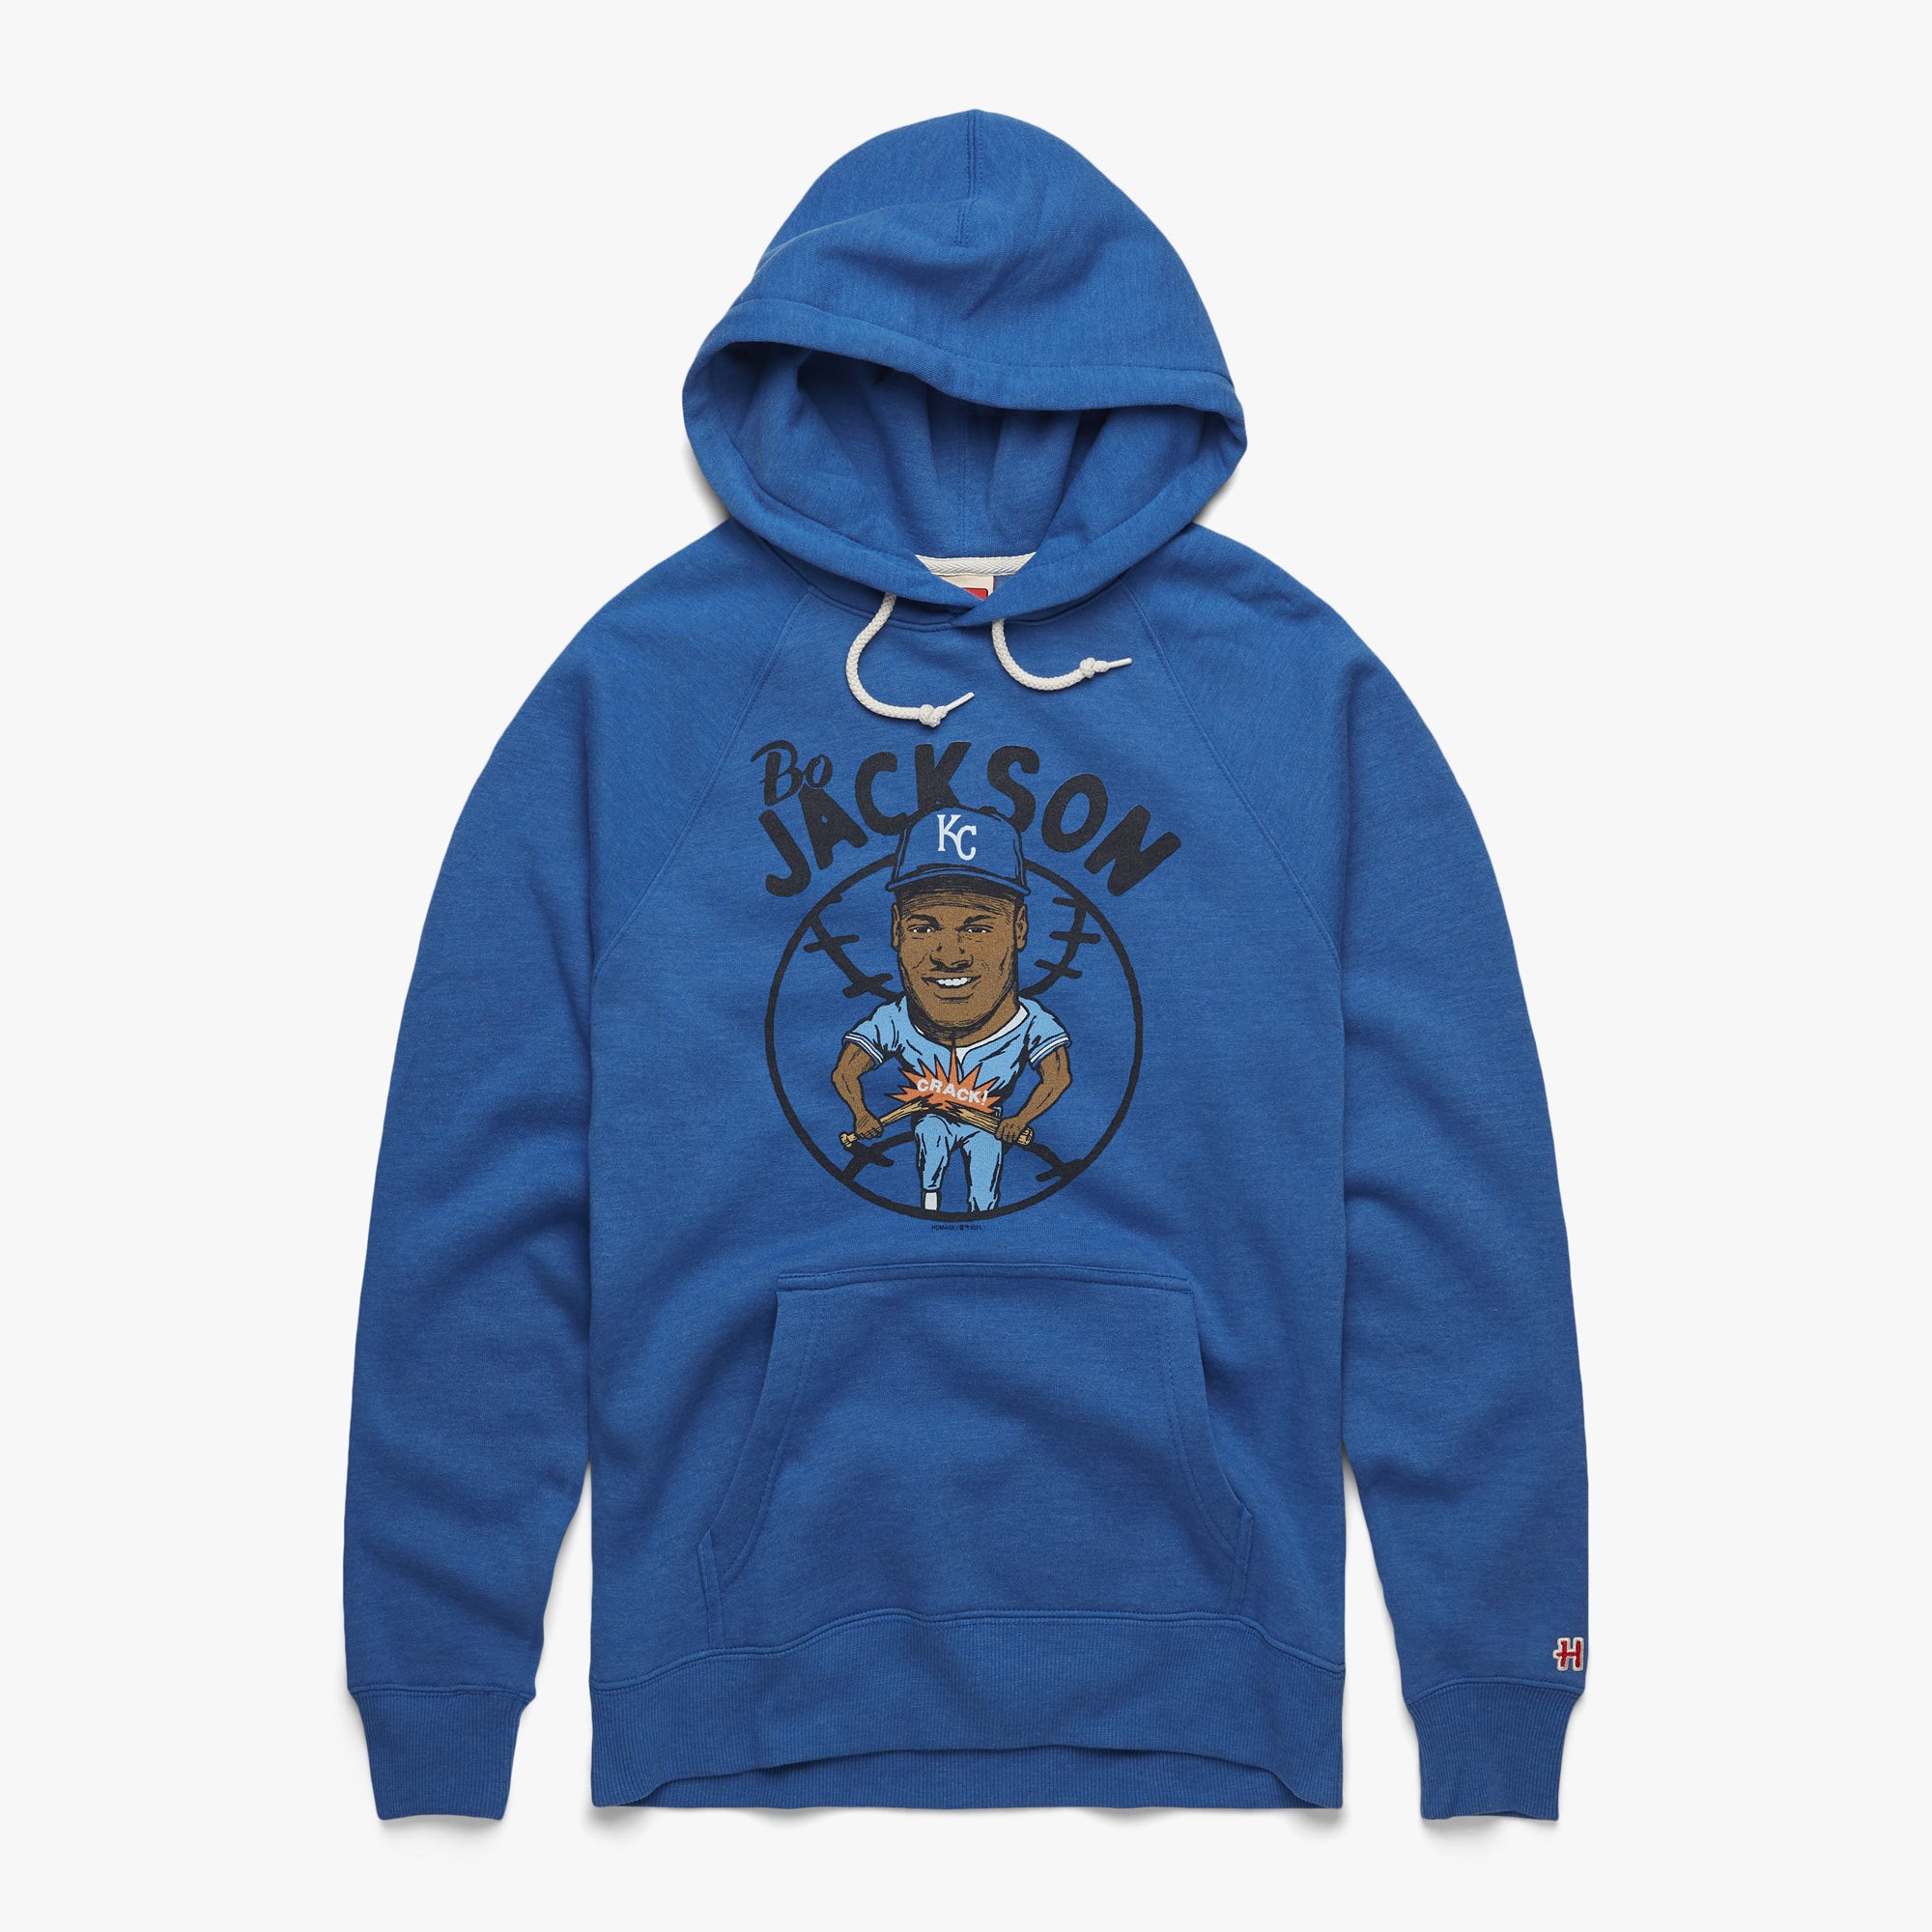 Royals Bo Jackson Hoodie from Homage. | Royal Blue | Vintage Apparel from Homage.